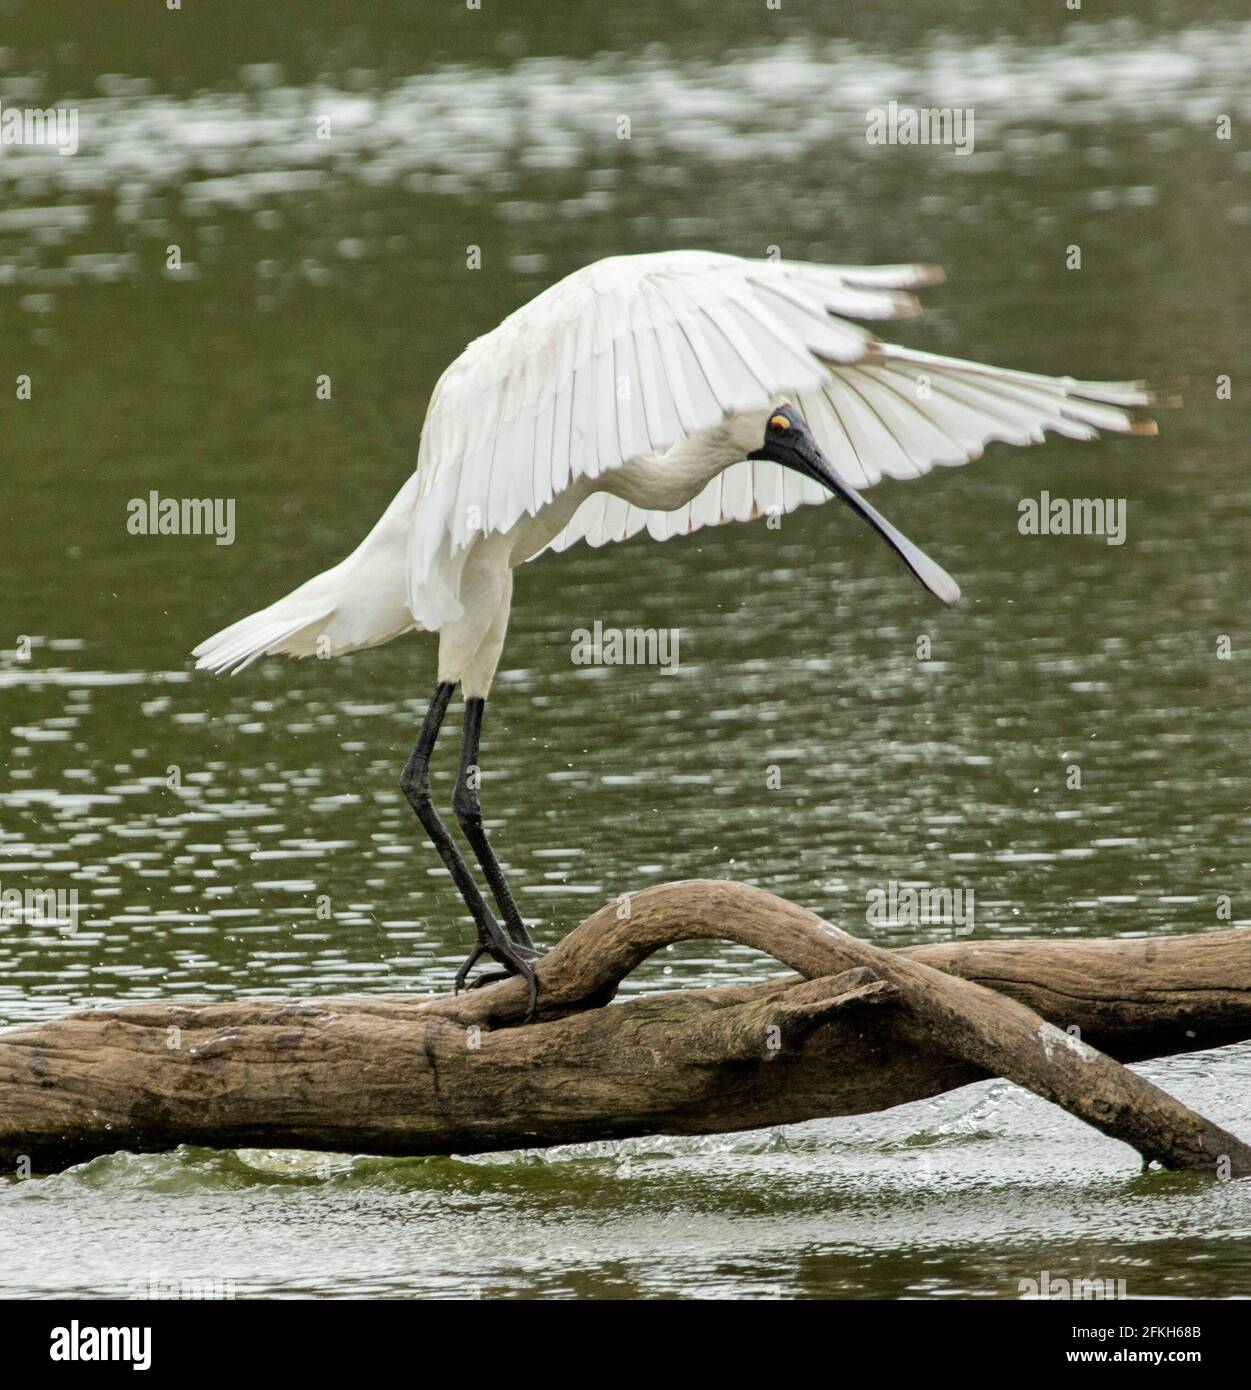 Royal Spoonbill, Platalea regia, on log over water of lake with wings outstretched ready for flight Stock Photo